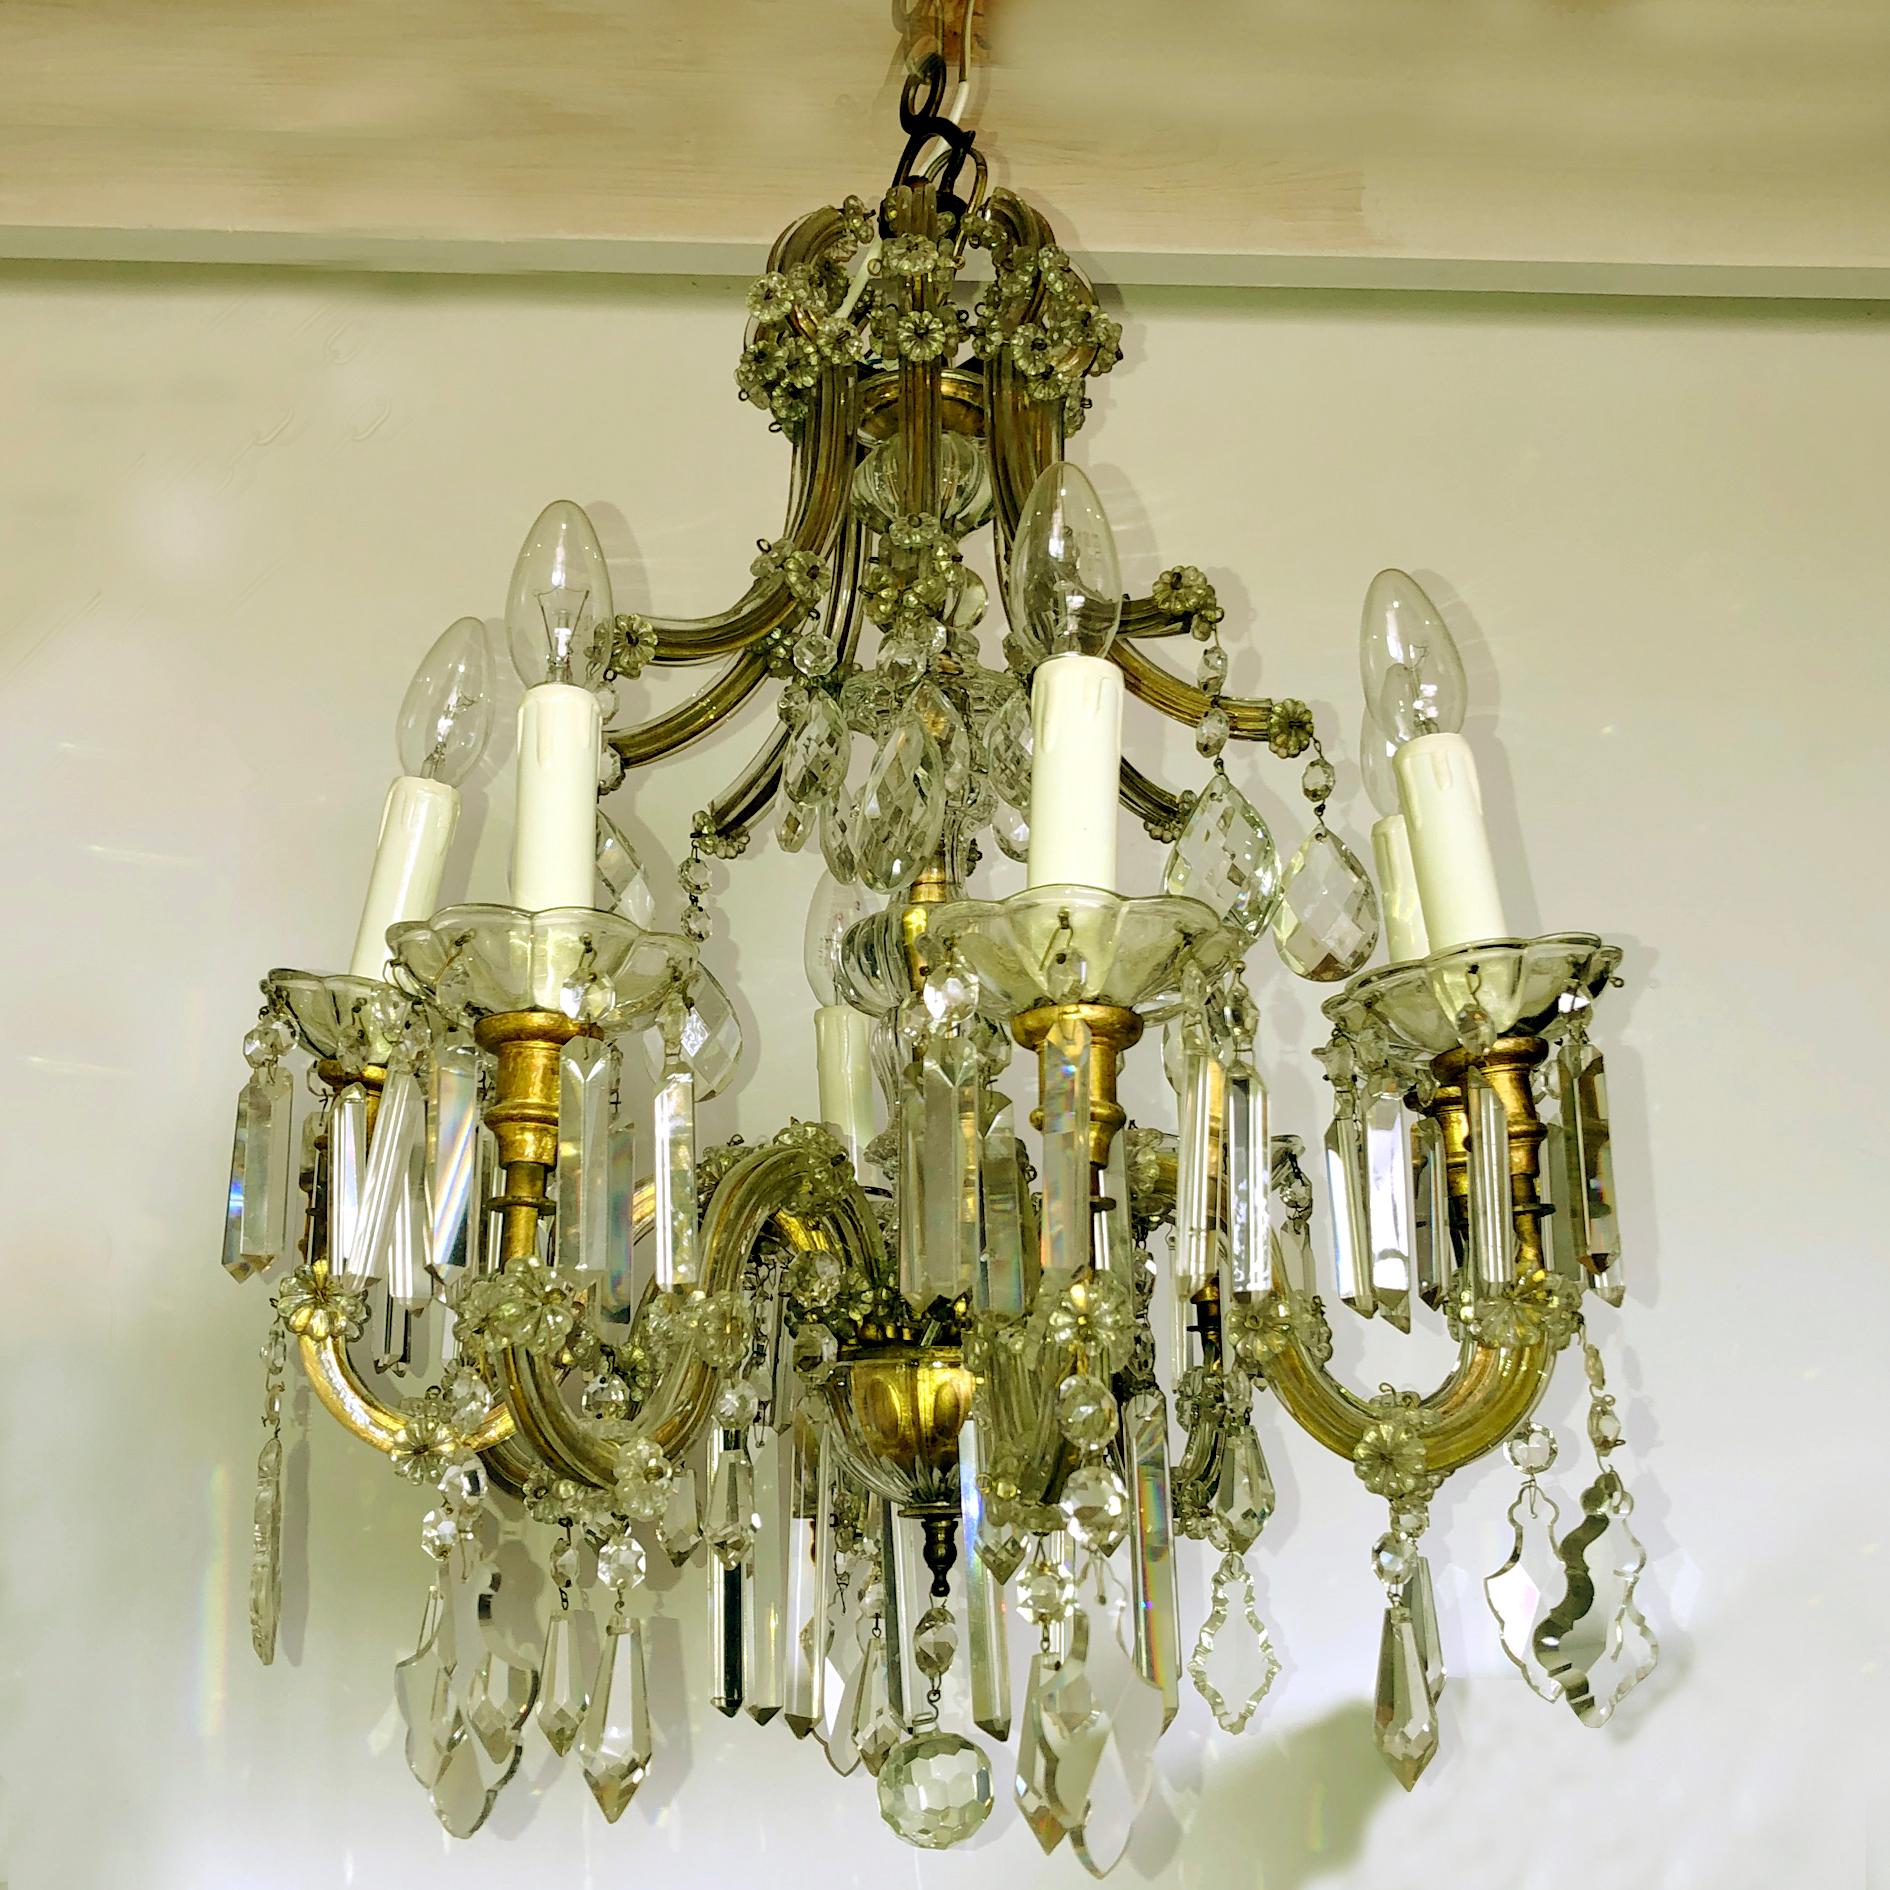 Baroque Revival Eight Arm Maria Theresa Crystal Chandelier, Hungary or Austria, 1900s For Sale